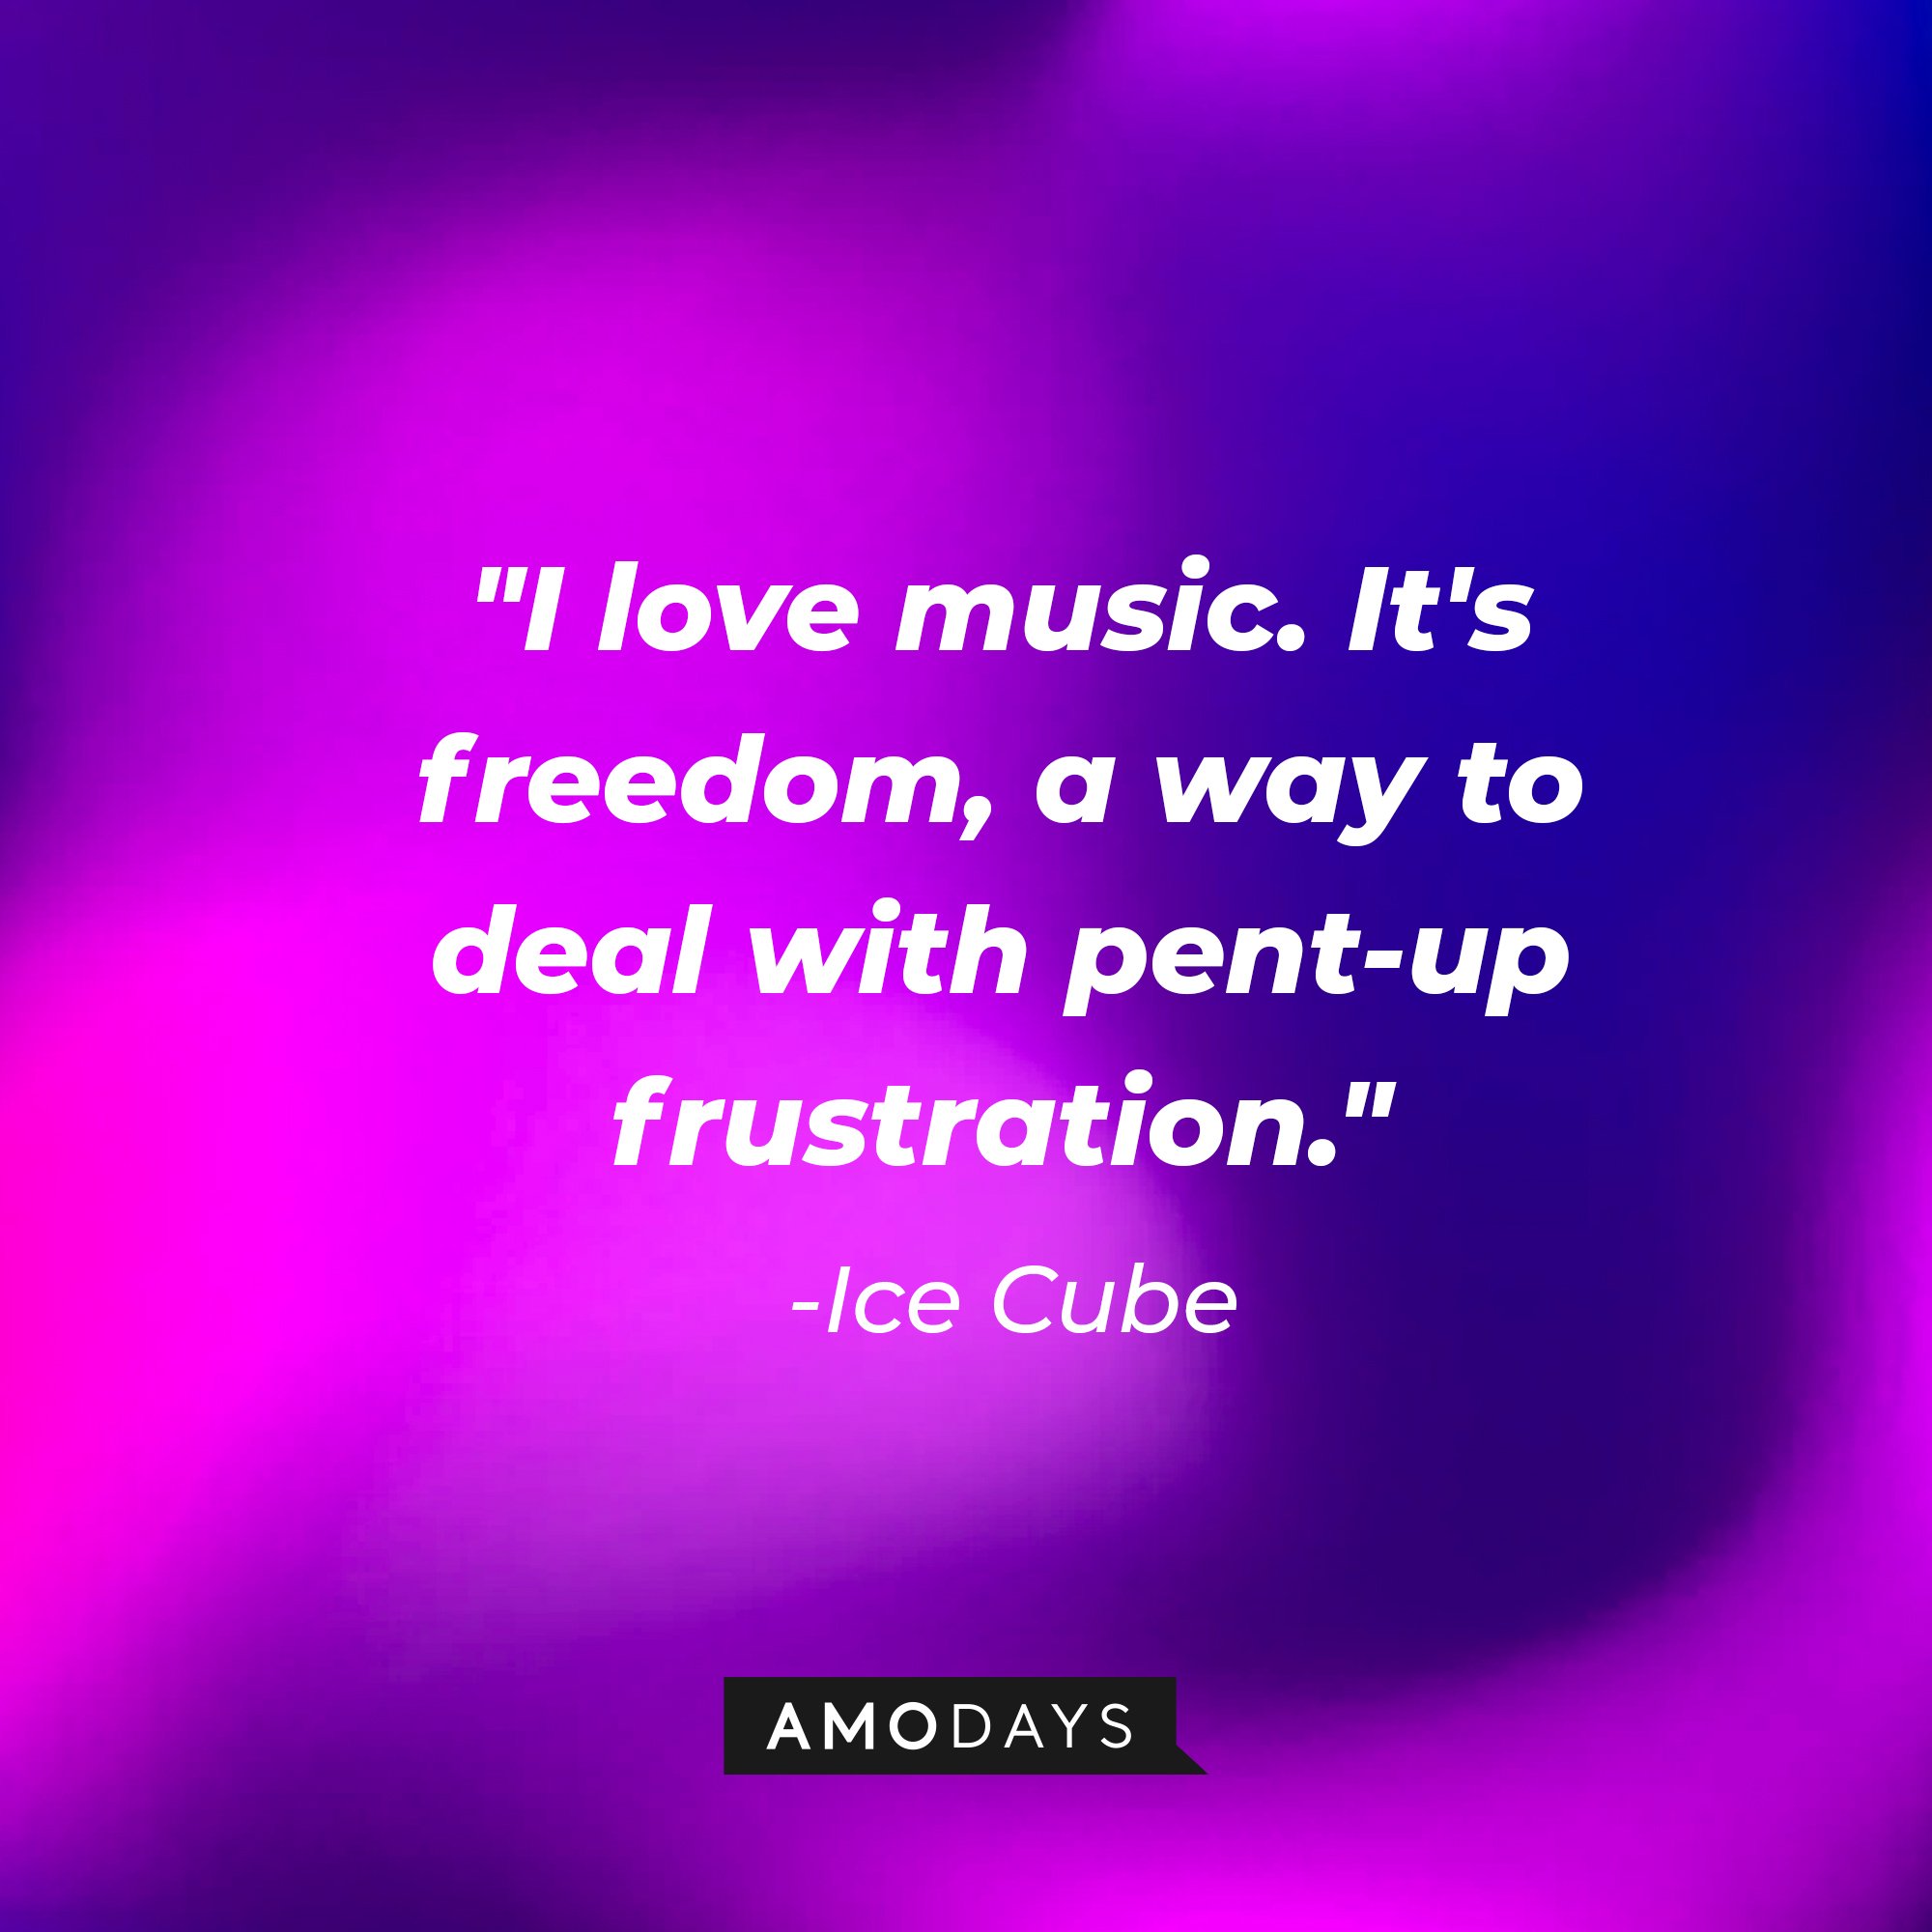 Ice Cube's quote: "I love music. It's freedom, a way to deal with pent-up frustration." — Ice Cube | Image: AmoDays